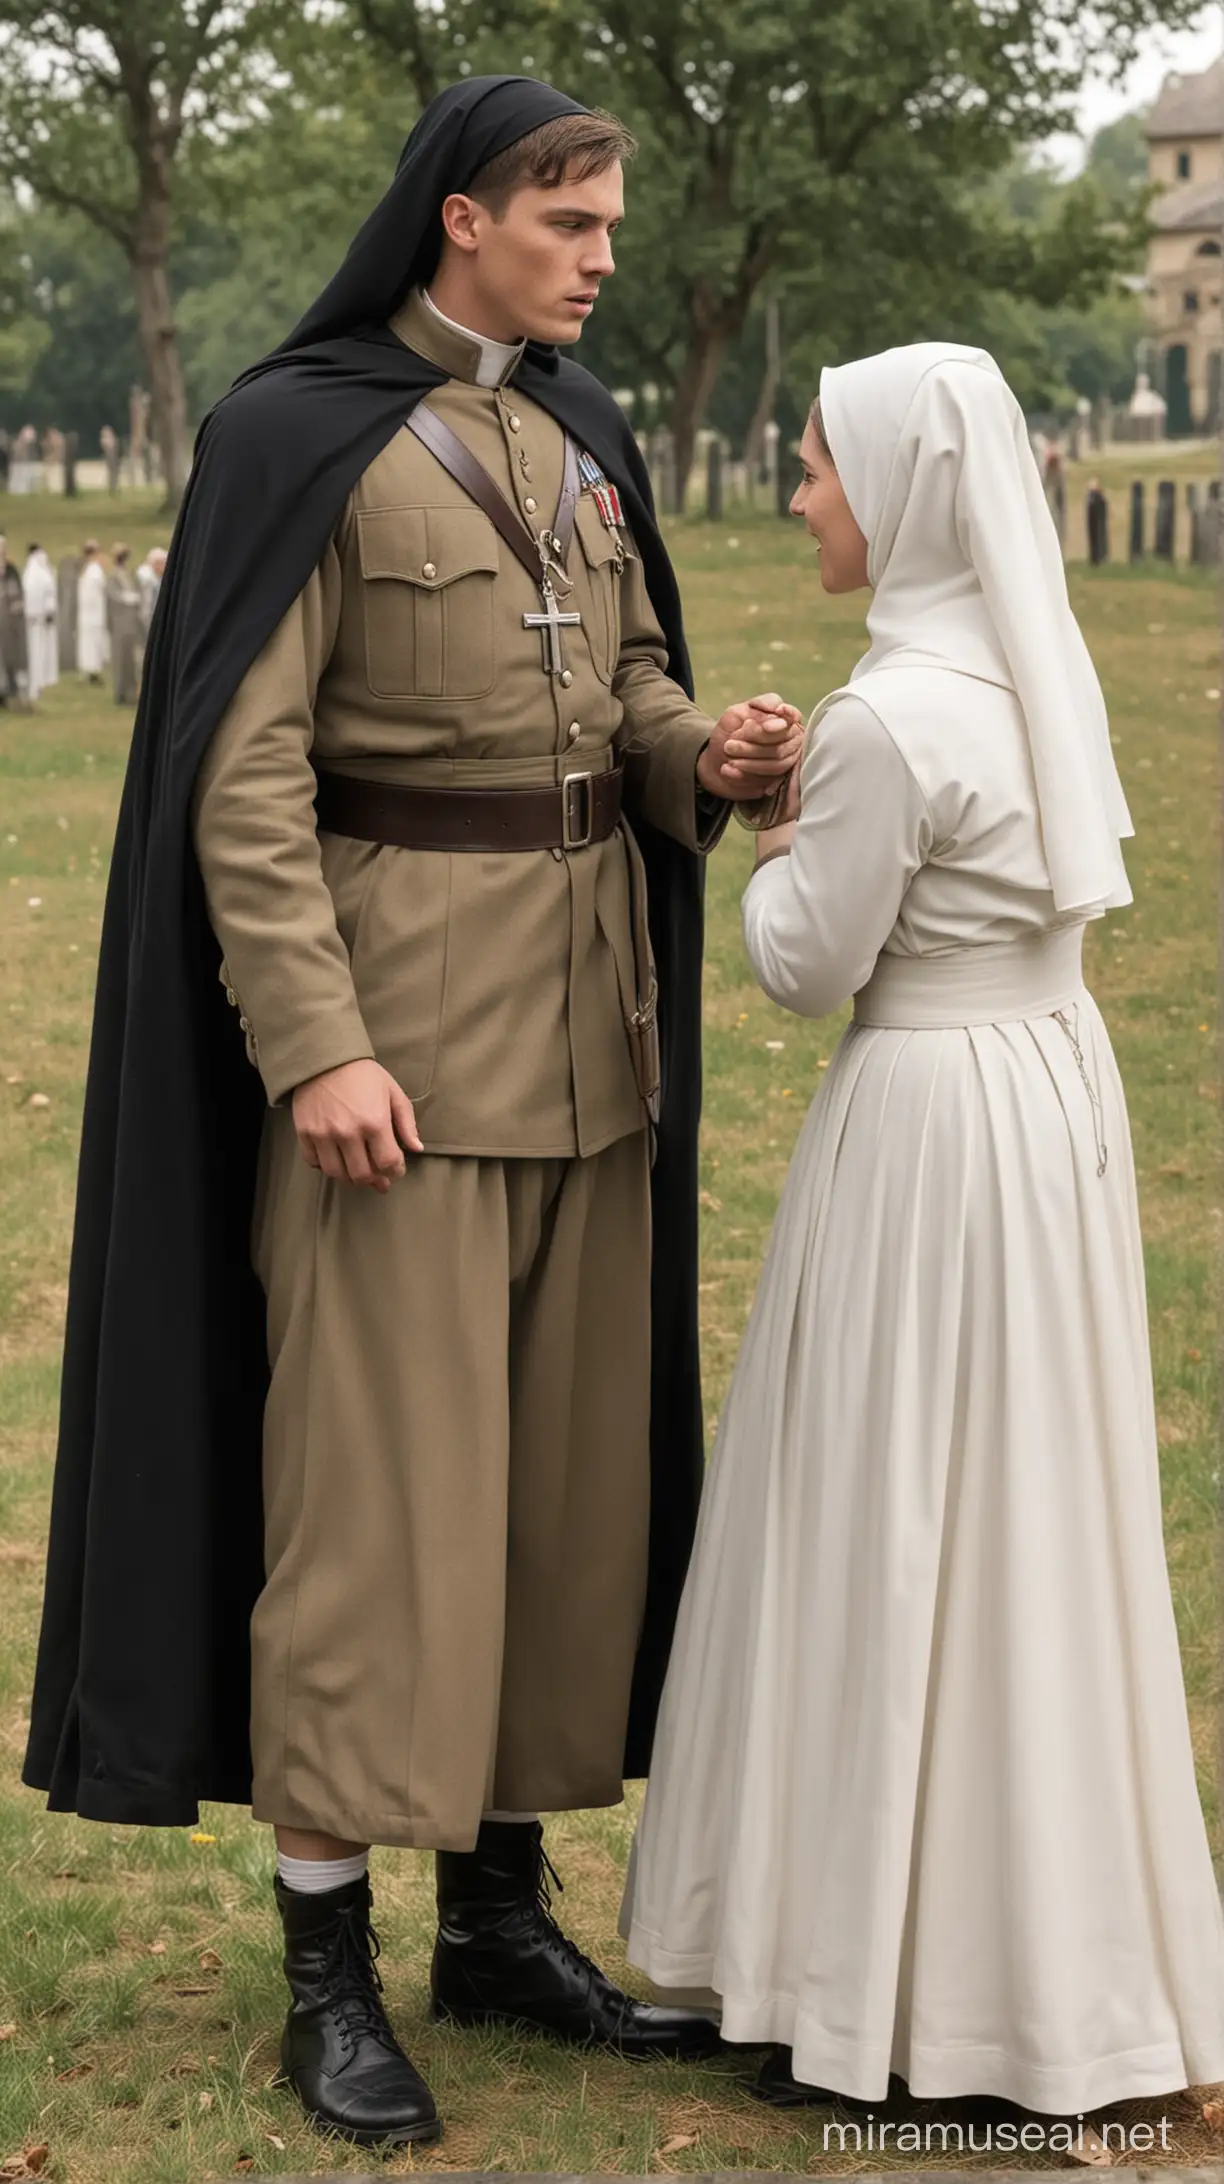 Soldier Seeking Refuge Under Nuns Skirt for Safety and Explanation